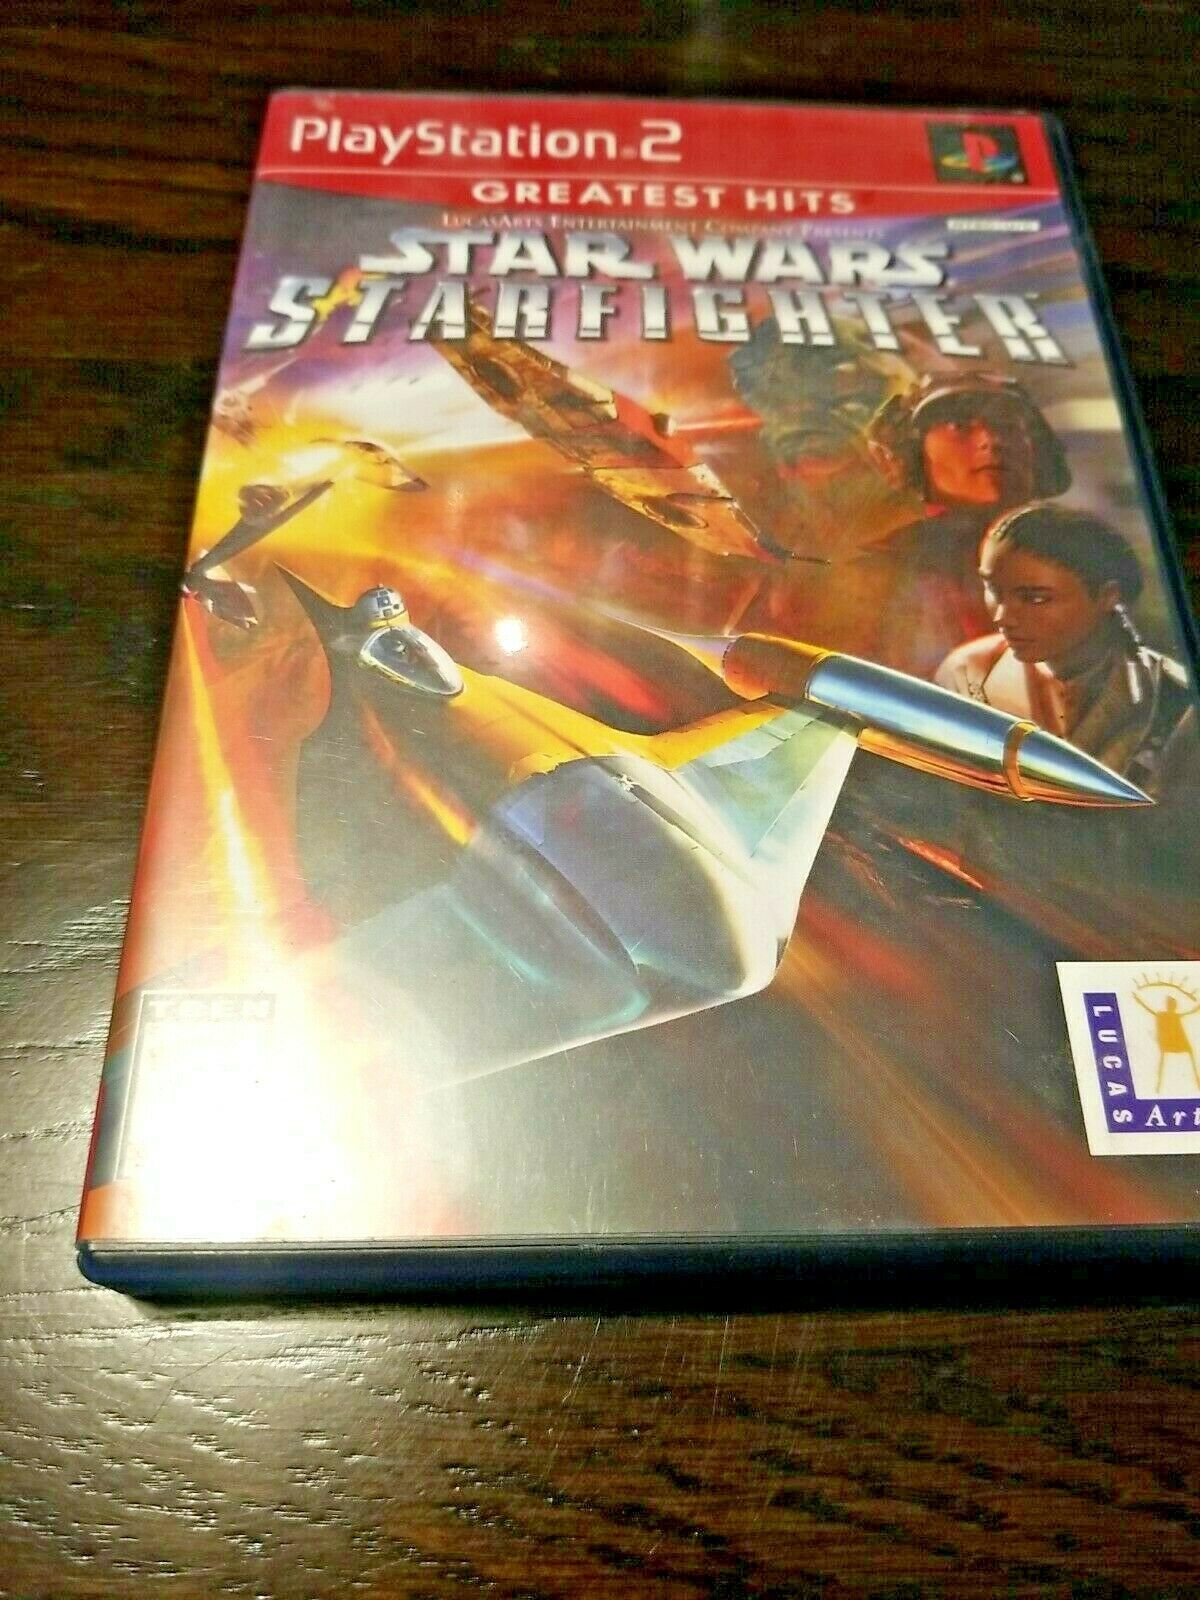 Primary image for Star Wars: Starfighter Greatest Hits (PS2 PlayStation 2, 2002) 